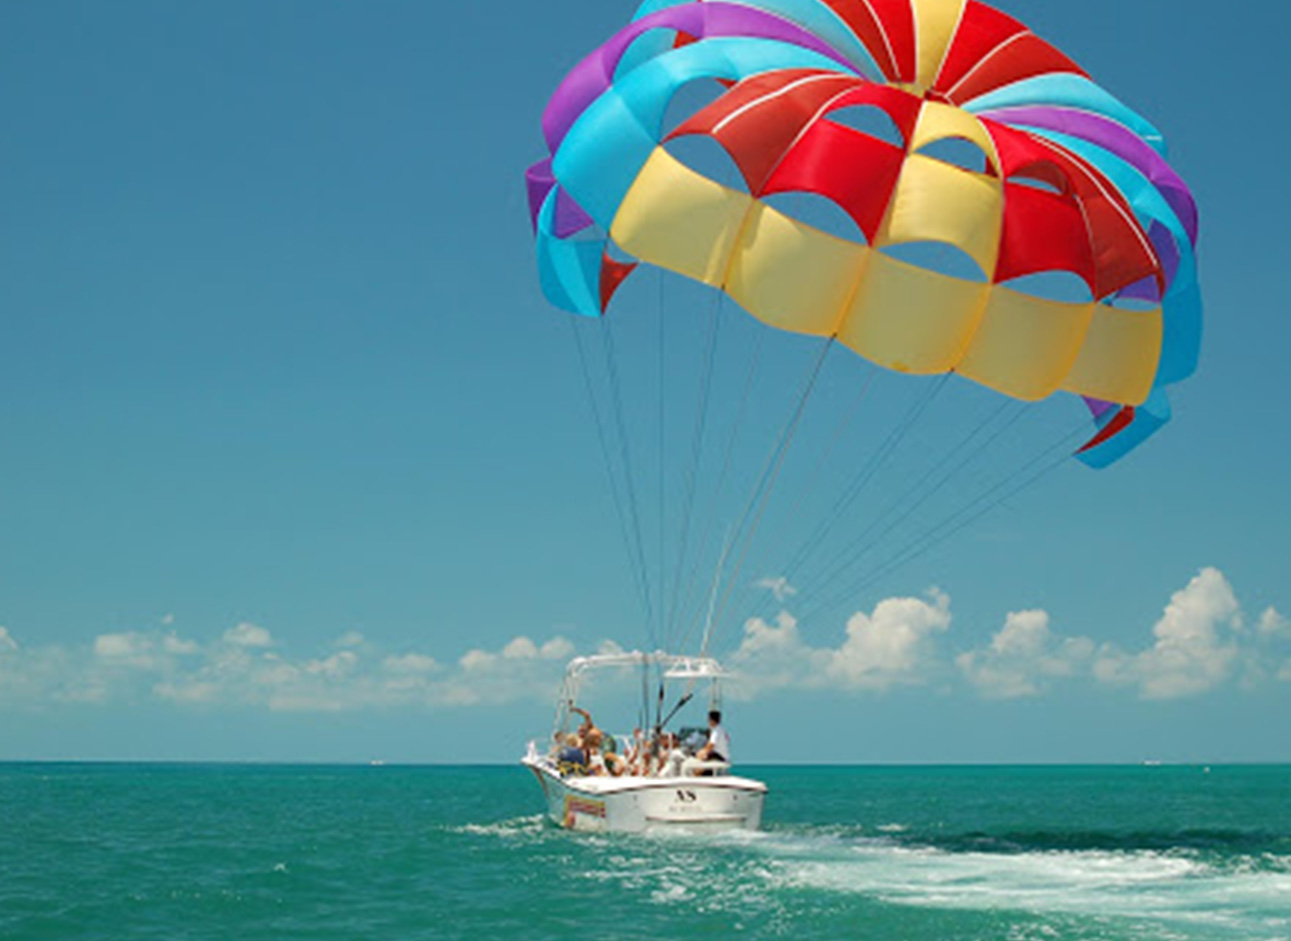 Parasailing - Soaring above water with thrill